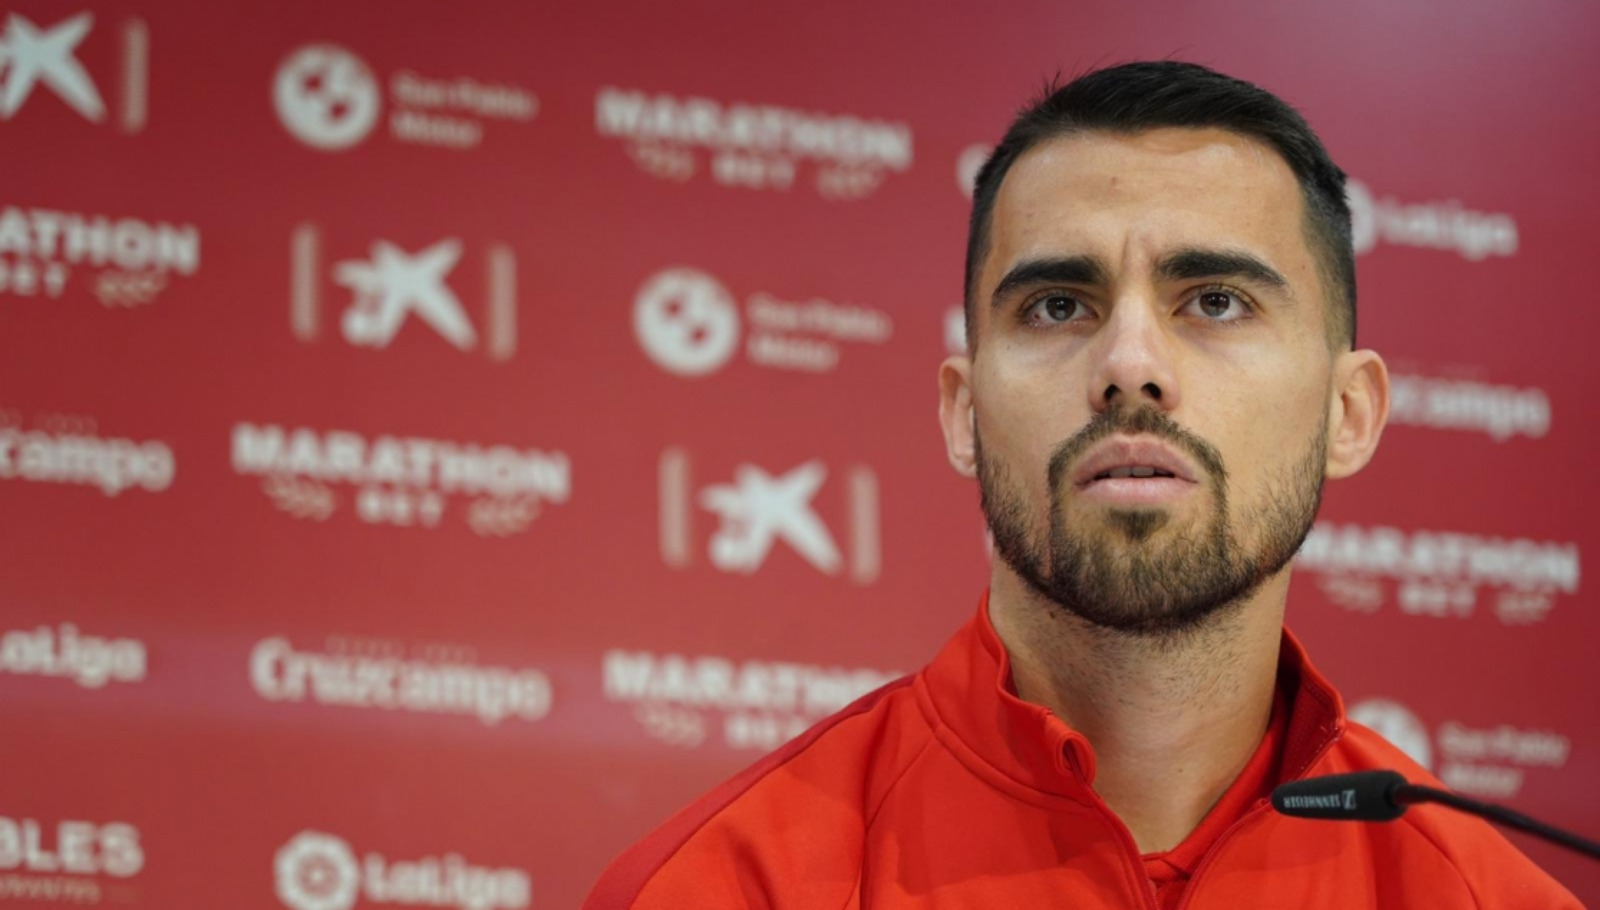 Suso Signs a Five-year Contract of 24 Million Euros with Sevilla